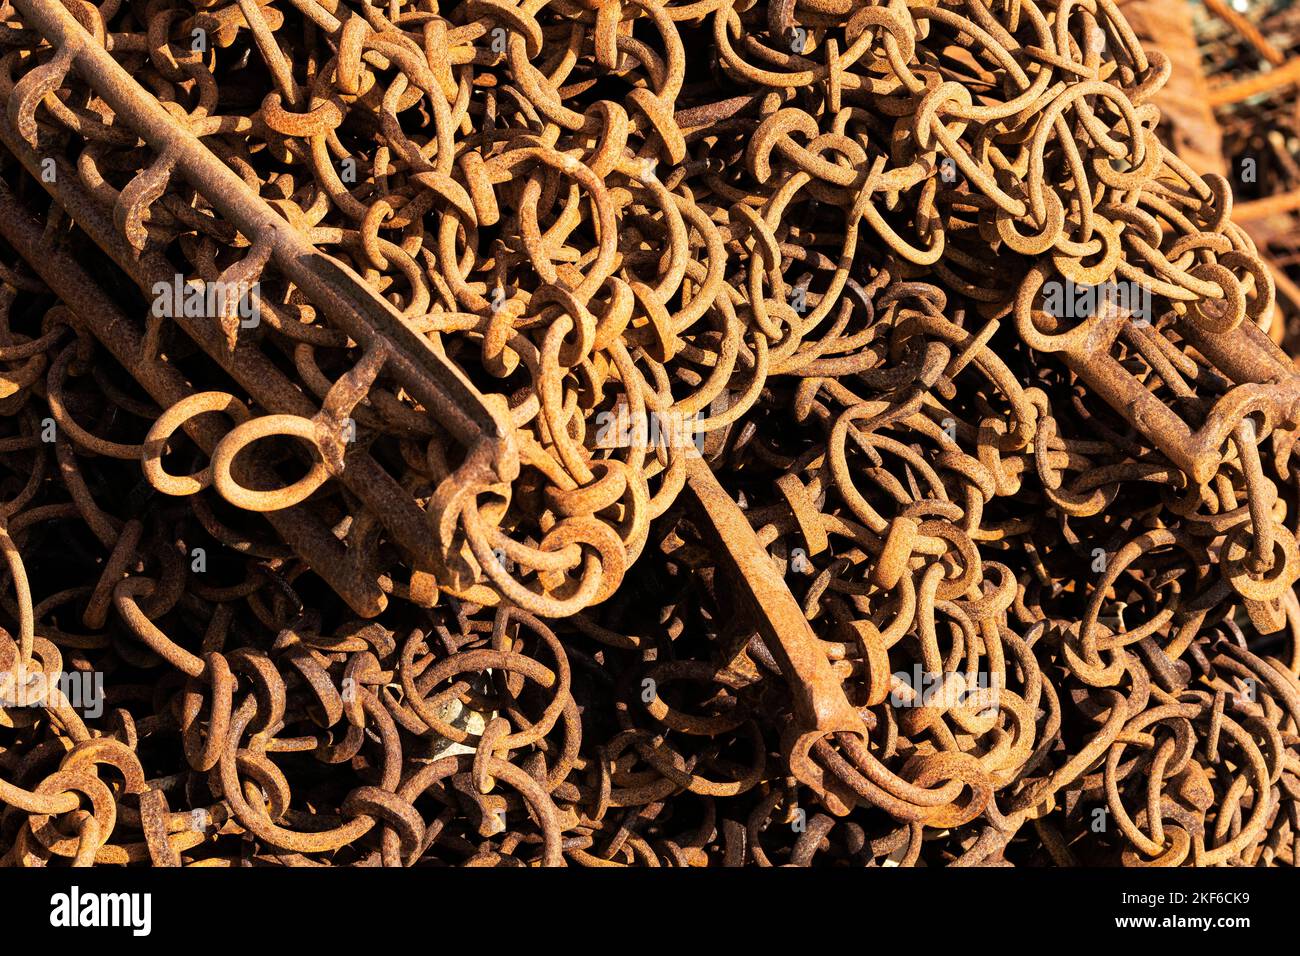 Rusty chain links are used to drag the sea floor for shellfish such as scallops and cockles. Such techniques for harvesting seafood are very harmful Stock Photo